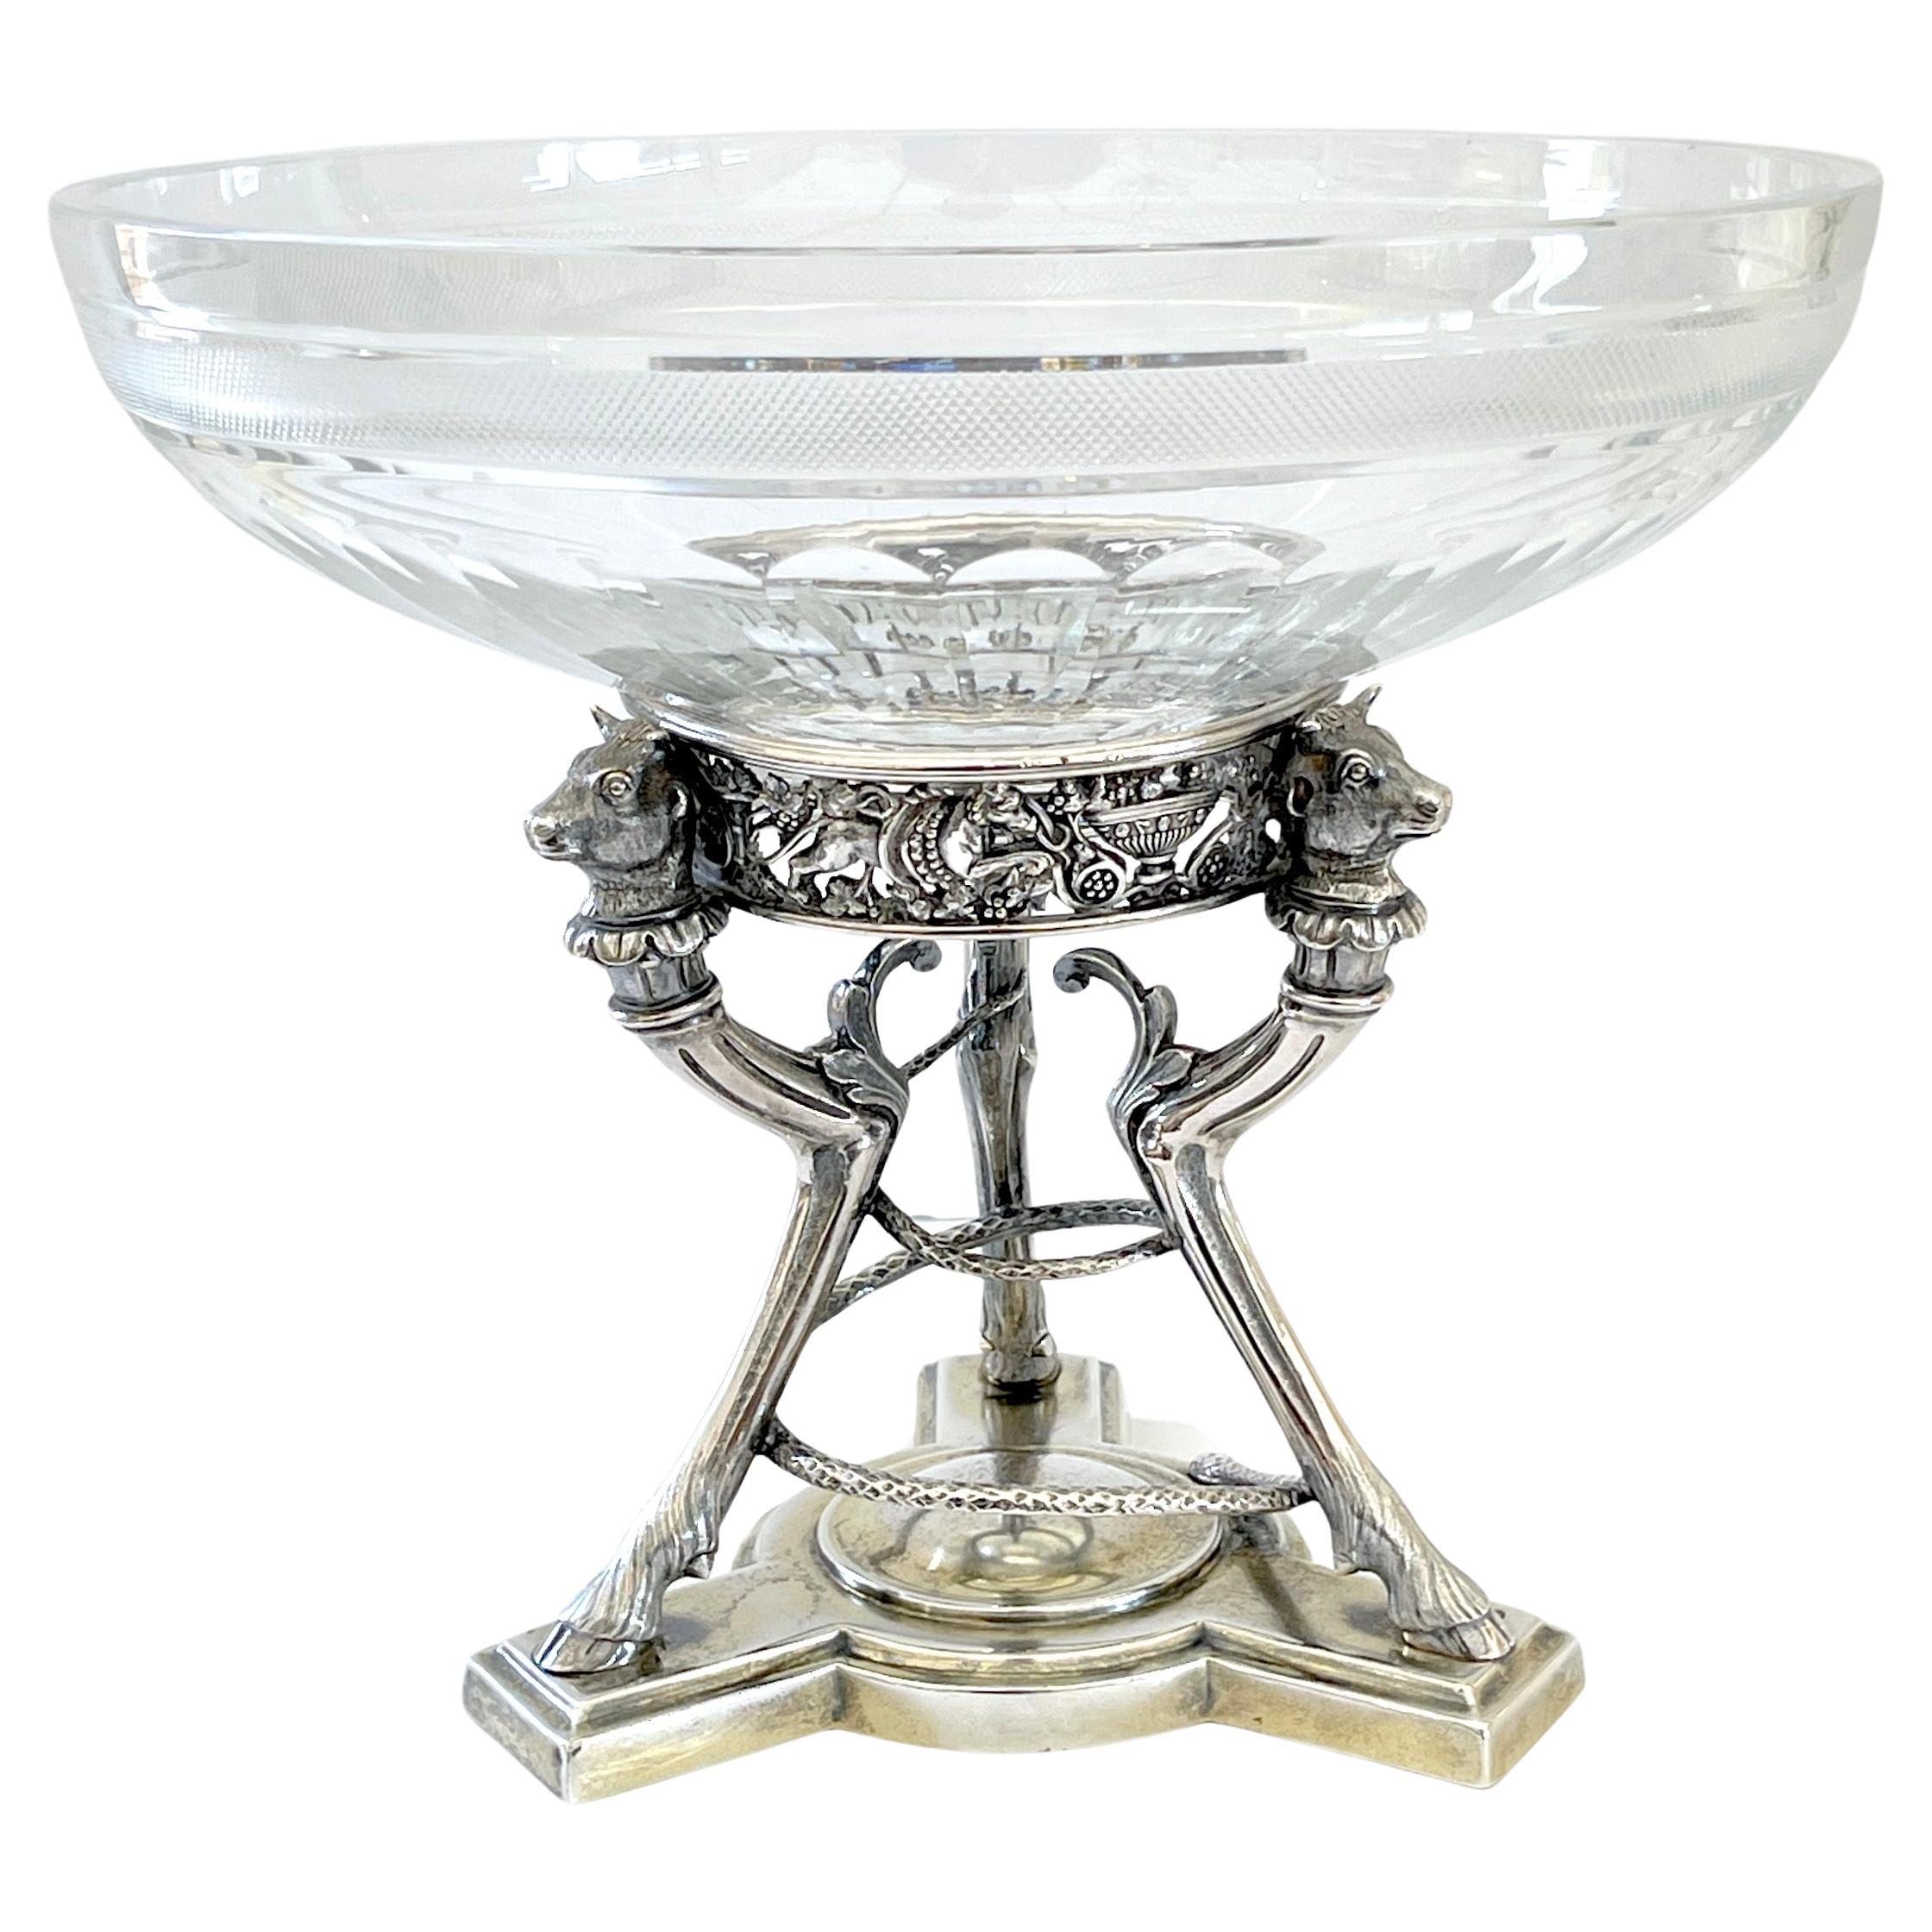 19th C English  Neoclassical  Sterling & Cut Glass Centerpiece/Tazza by S. Smith